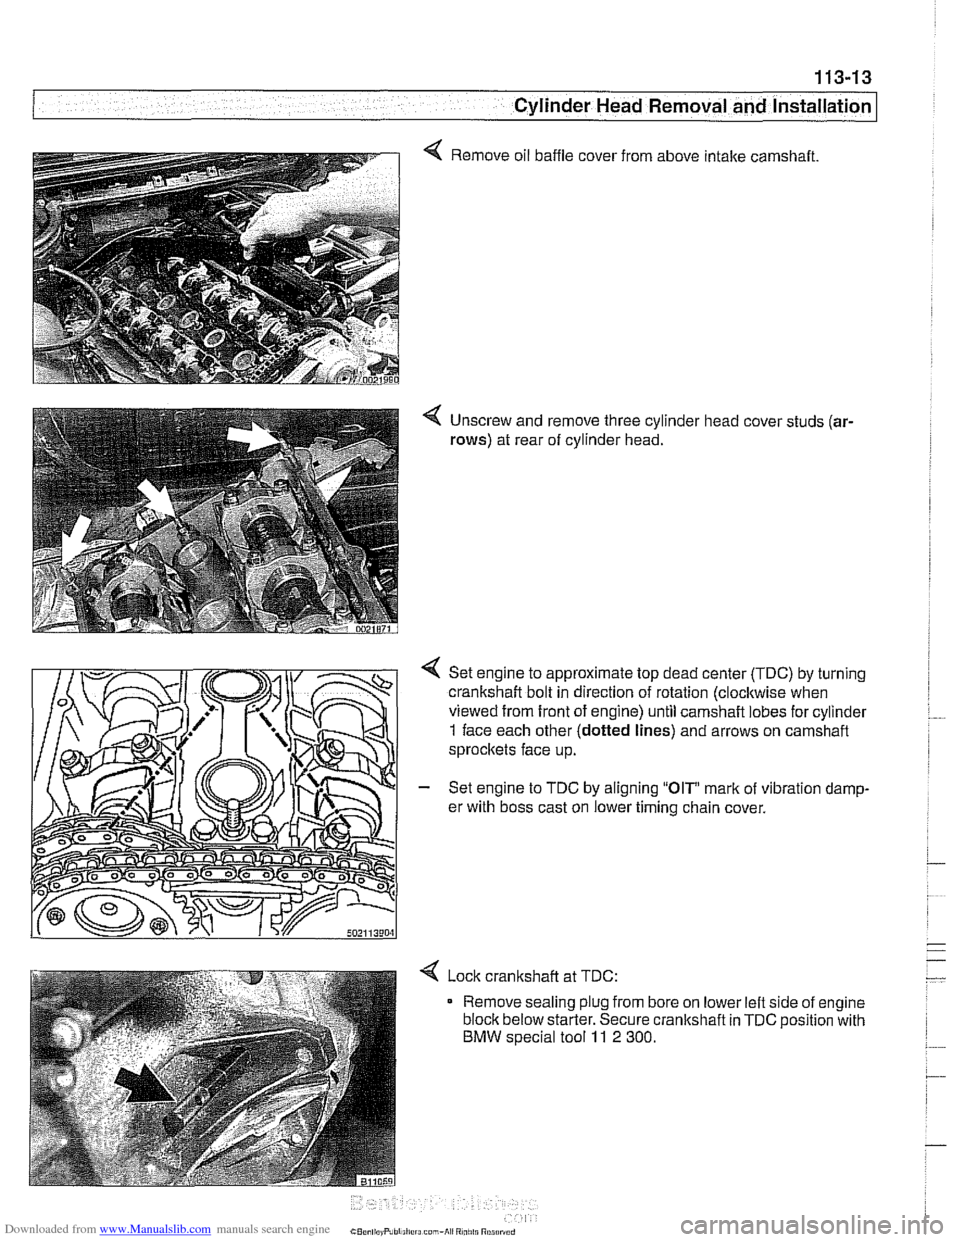 BMW 525i 2001 E39 Workshop Manual Downloaded from www.Manualslib.com manuals search engine 
- - , -. I Cylinder Head Removal and lnstallatio~ 
4 Remove oil baffle  cover from  above intake camshaft. 
4 Unscrew  and remove  three cylin